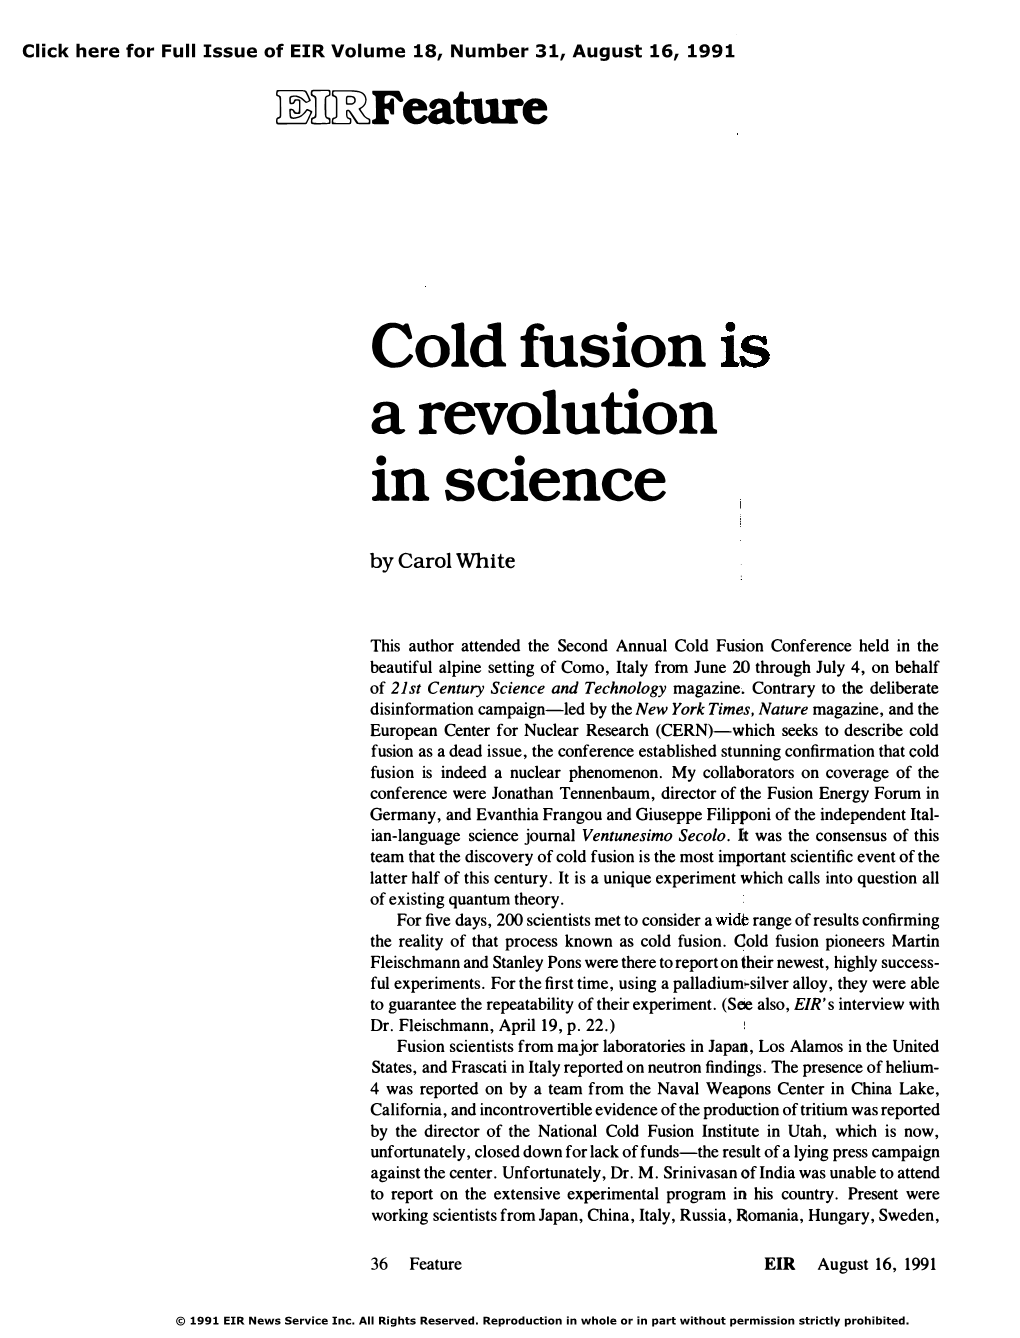 Cold Fusion Is a Revolution in Science